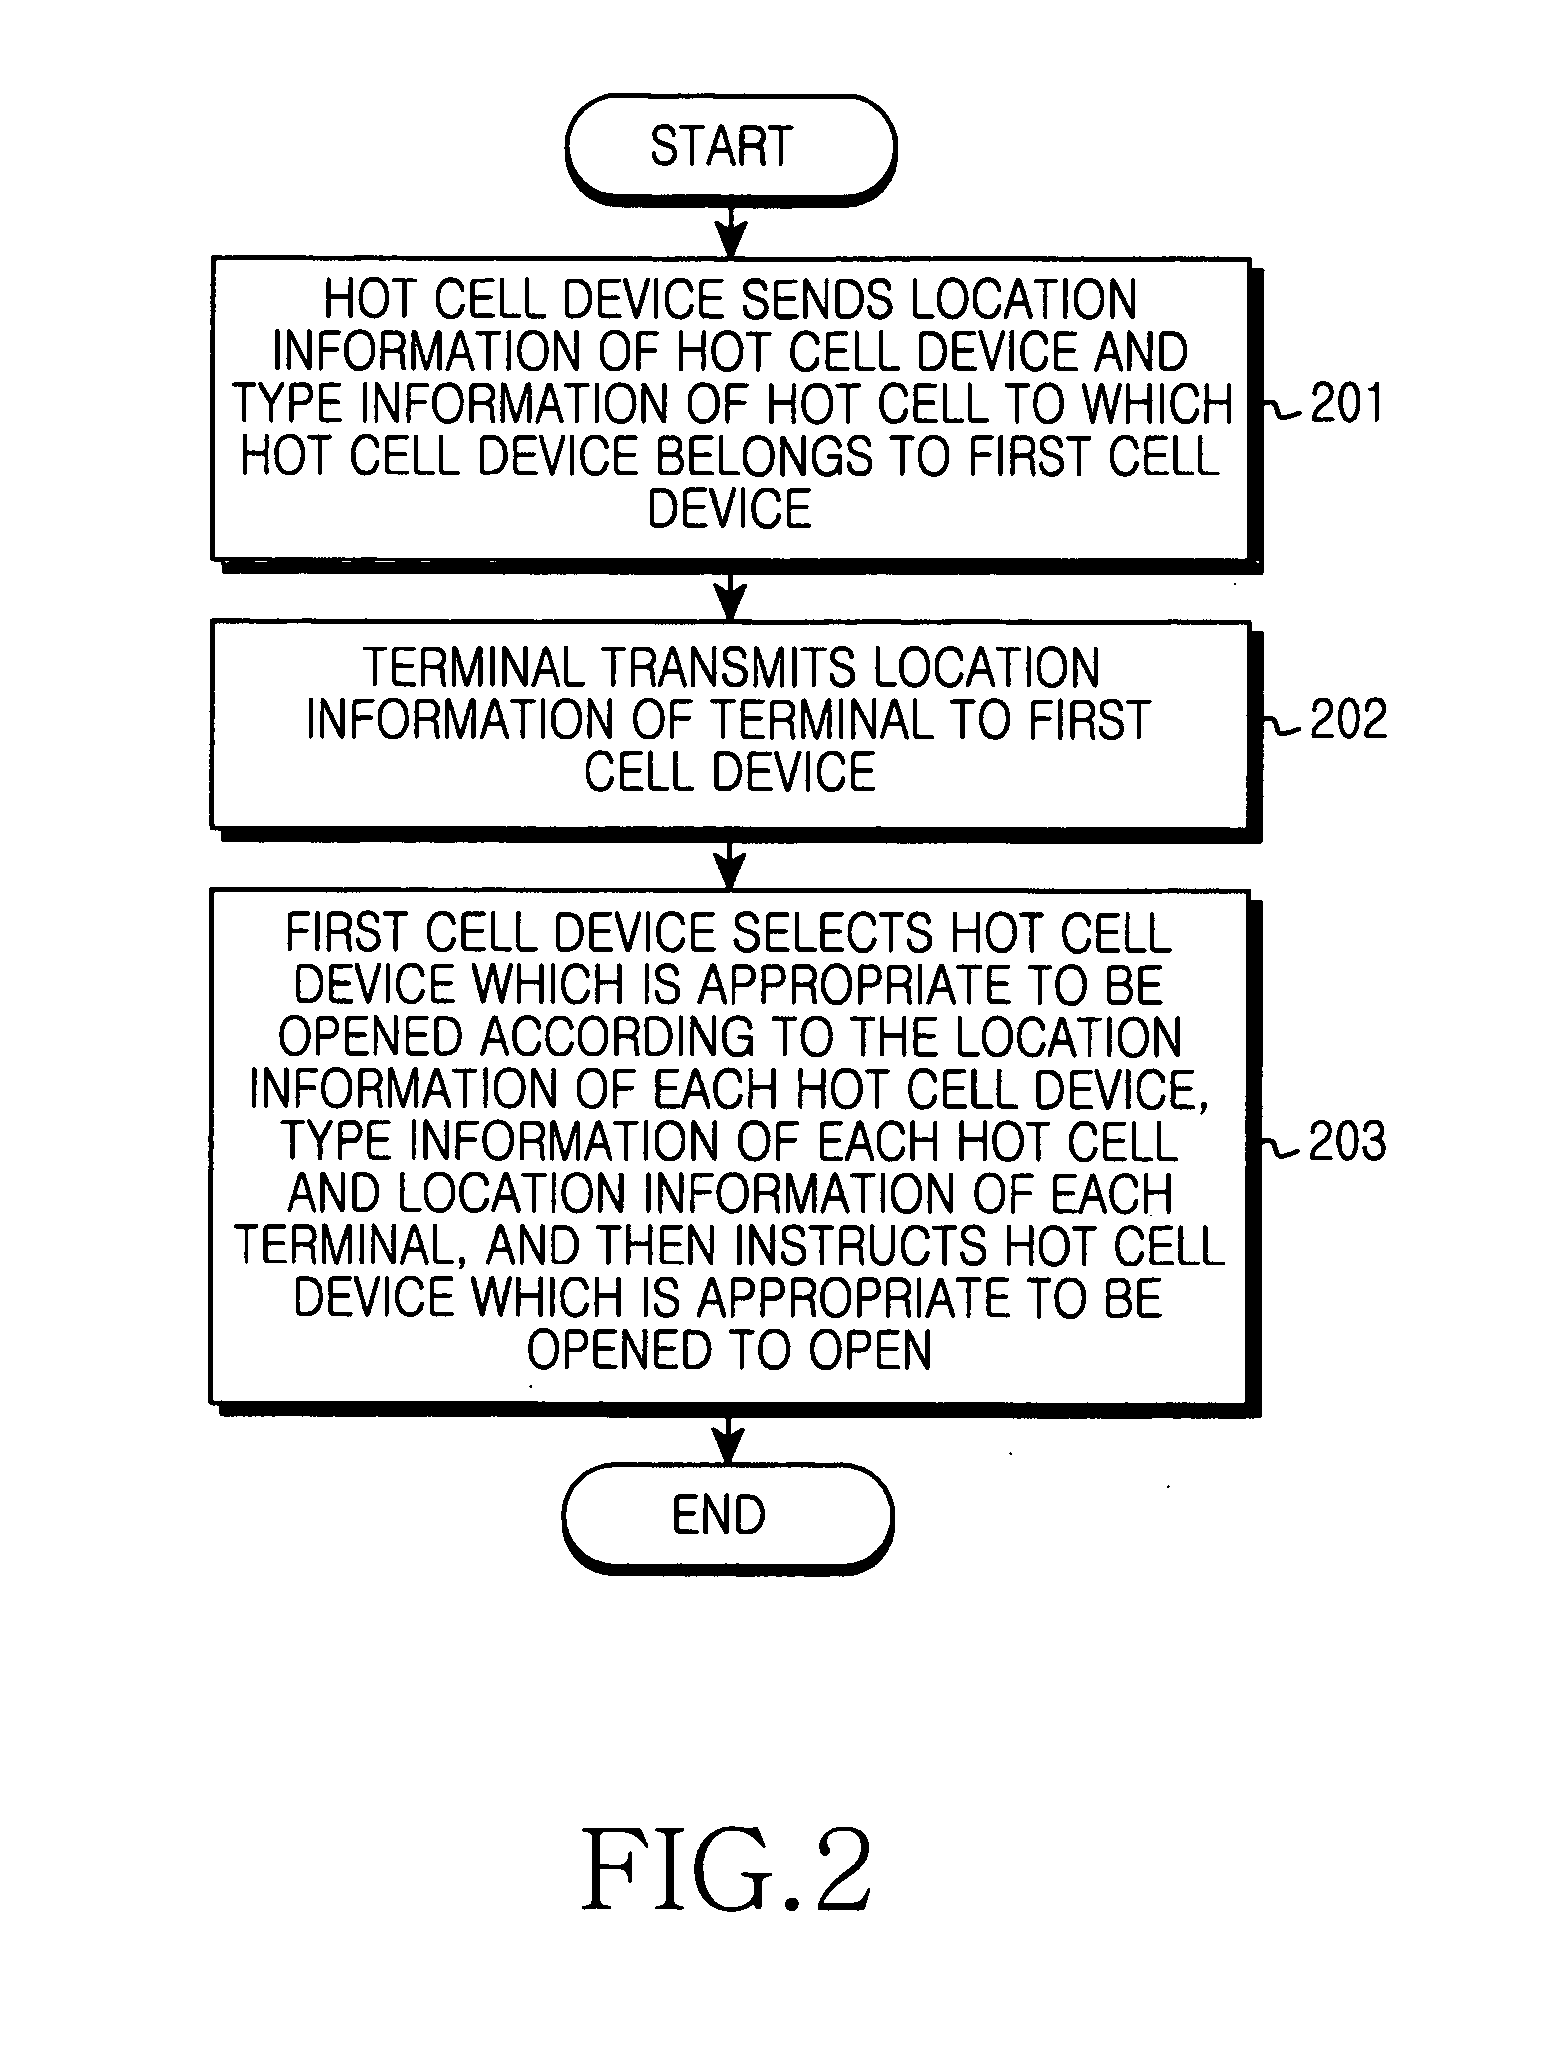 Apparatus and method for managing hot cell devices